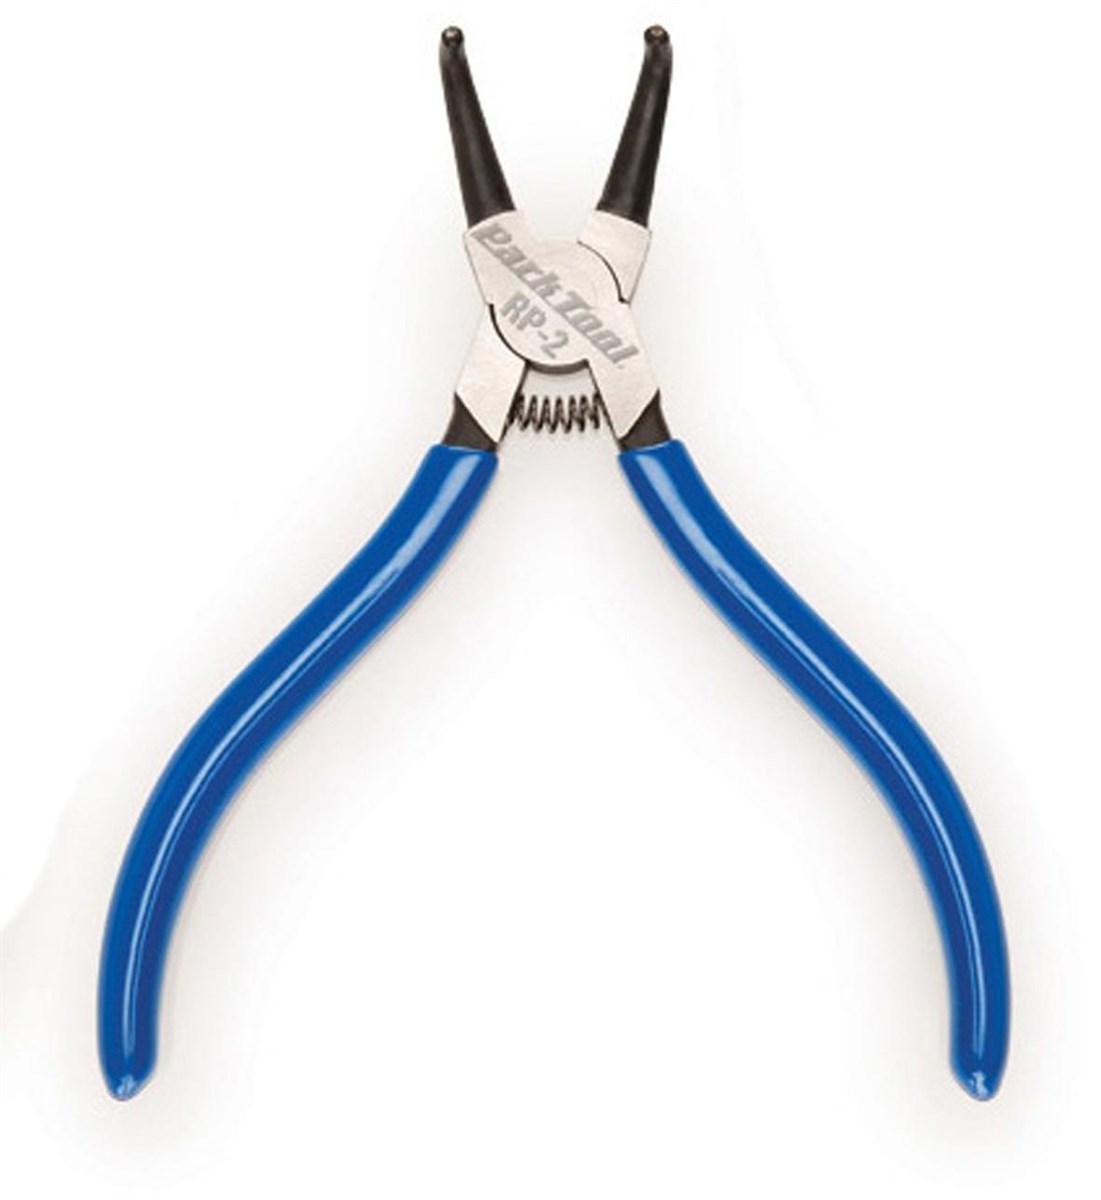 Park Tool RP-2 - Snap Ring (Circlip) Pliers - 1.3mm Bent Internal product image